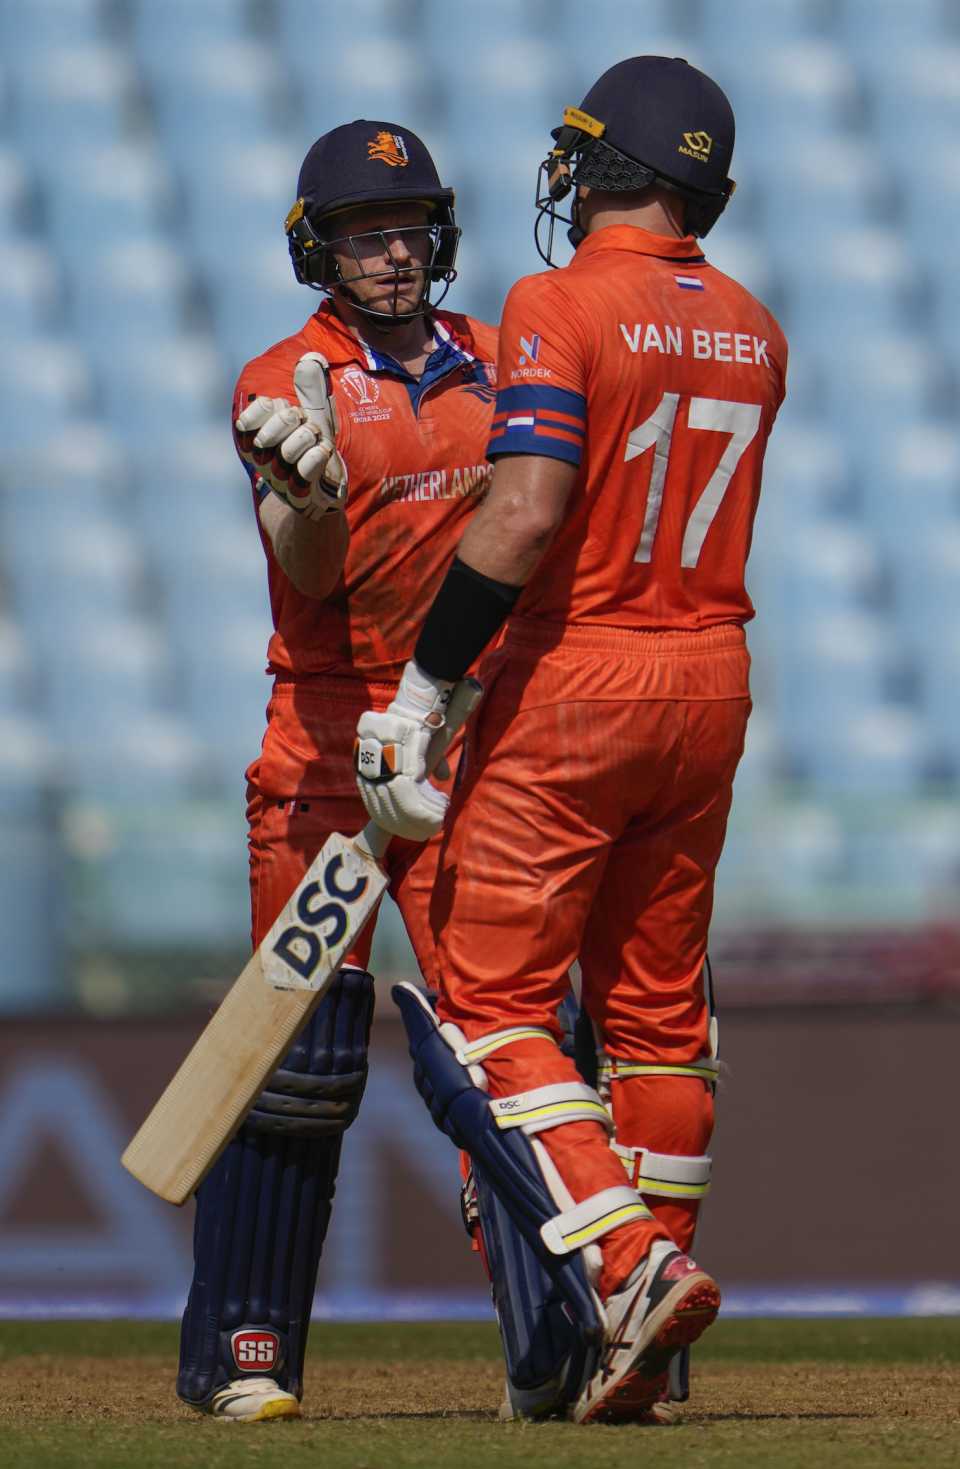 Sybrand Engelbrecht and Logan van Beek added a World Cup record 130 for the seventh wicket